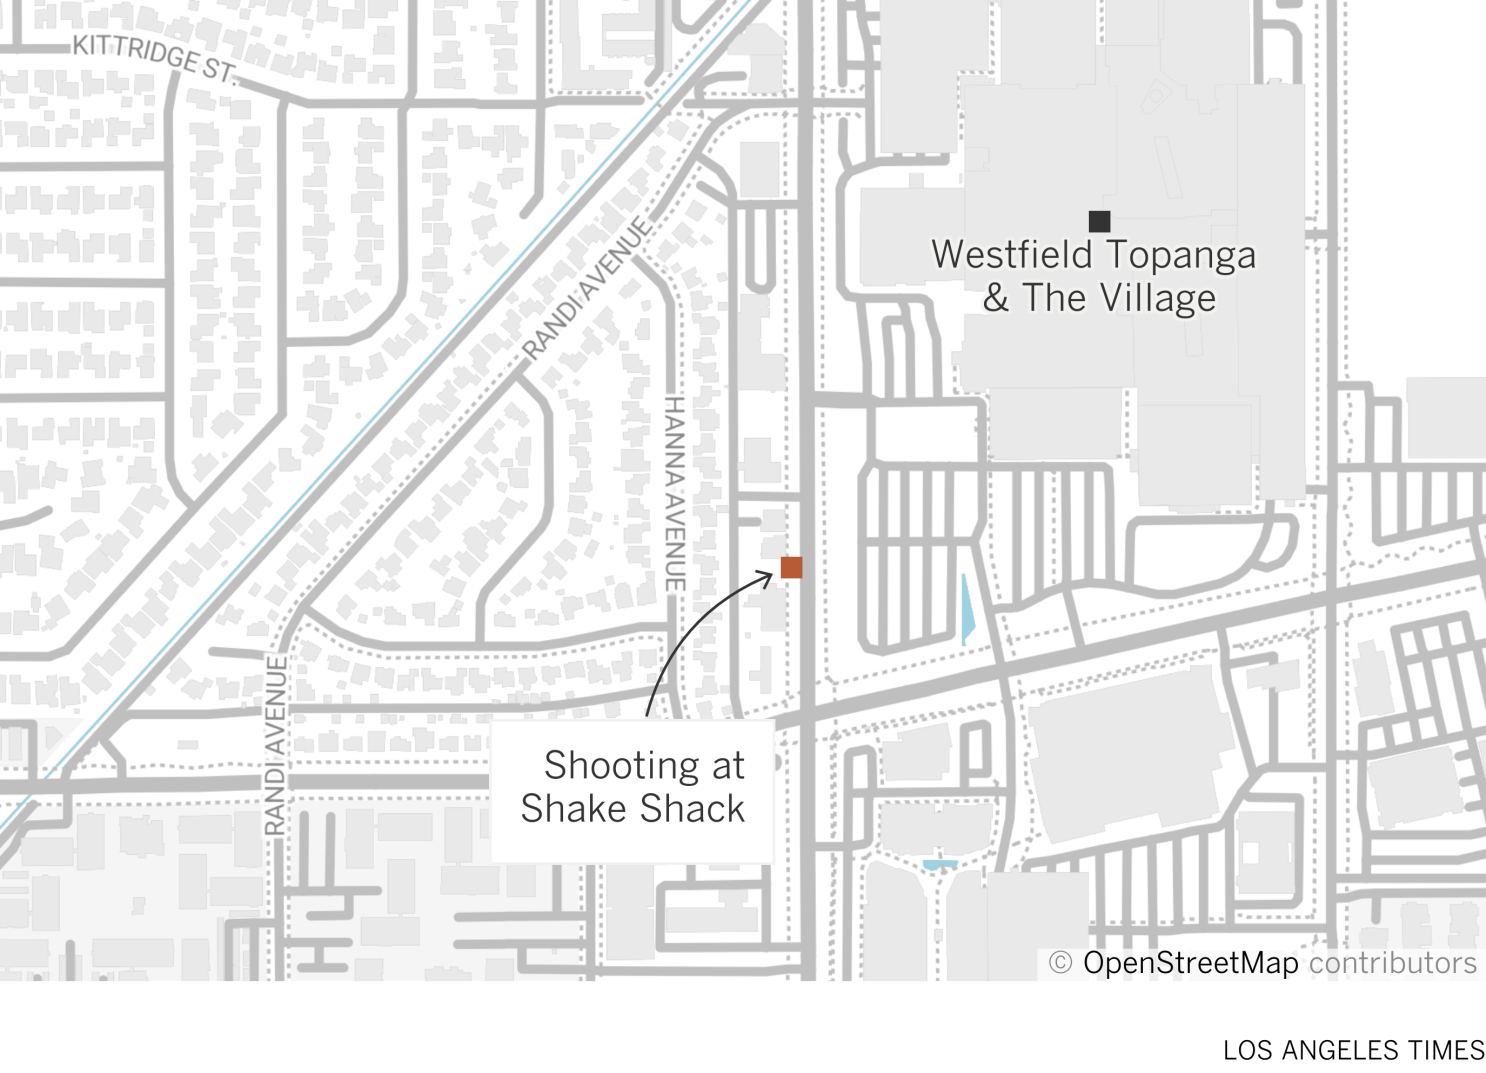 Shooting reported at Shake Shack in Woodland Hills - Los Angeles Times